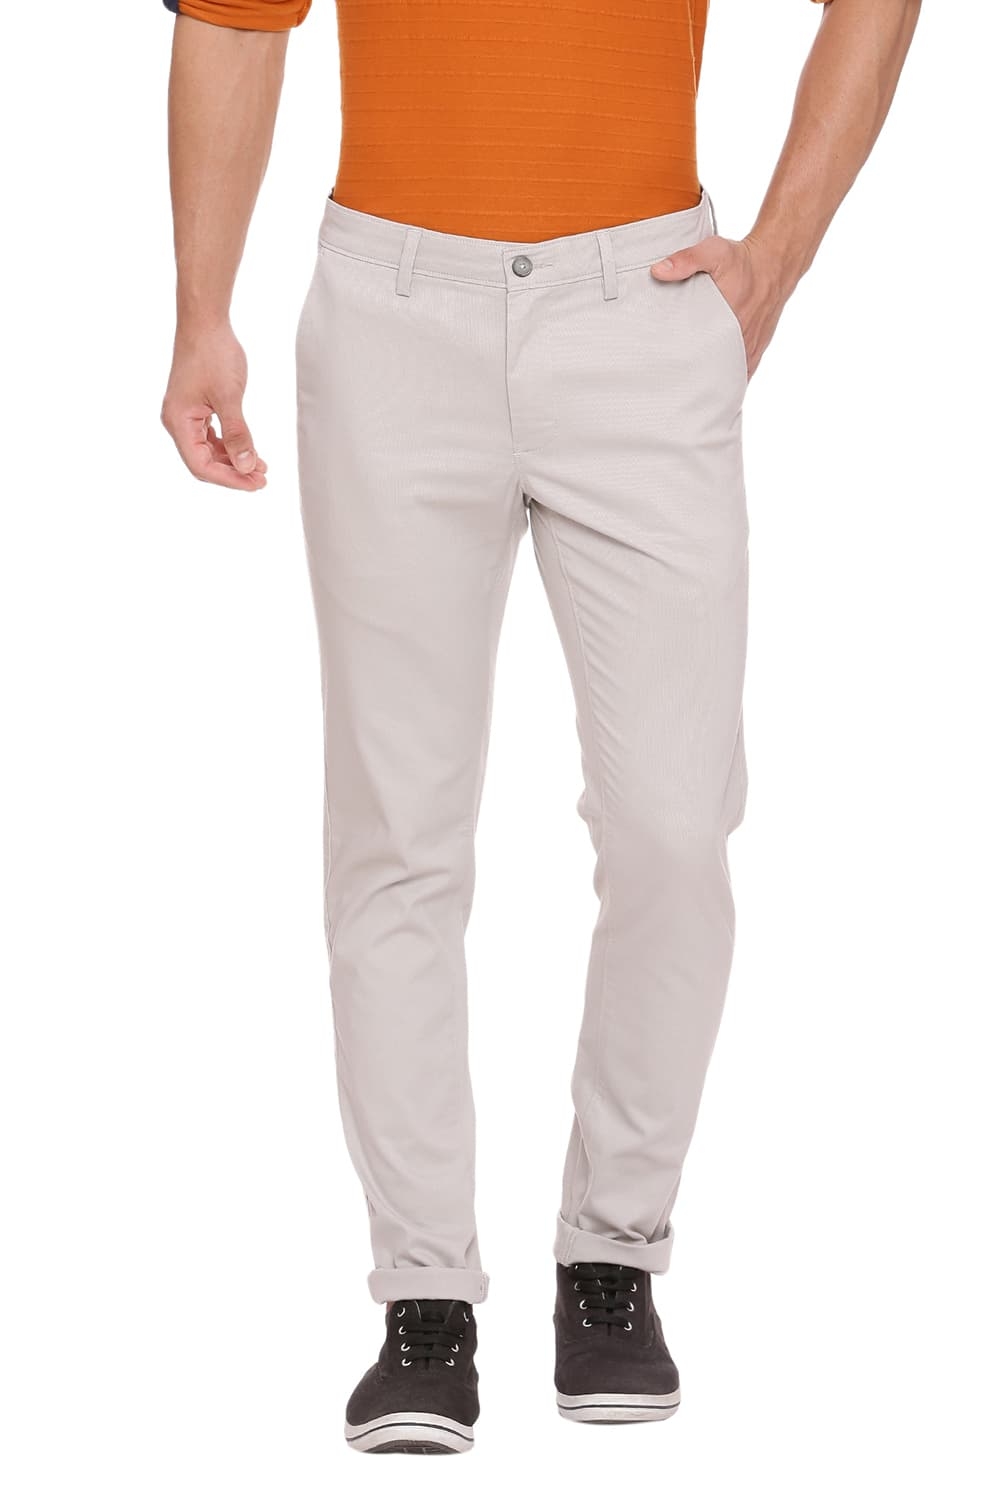 BASICS | Basics Tapered Fit Silver Lining Stretch Trouser